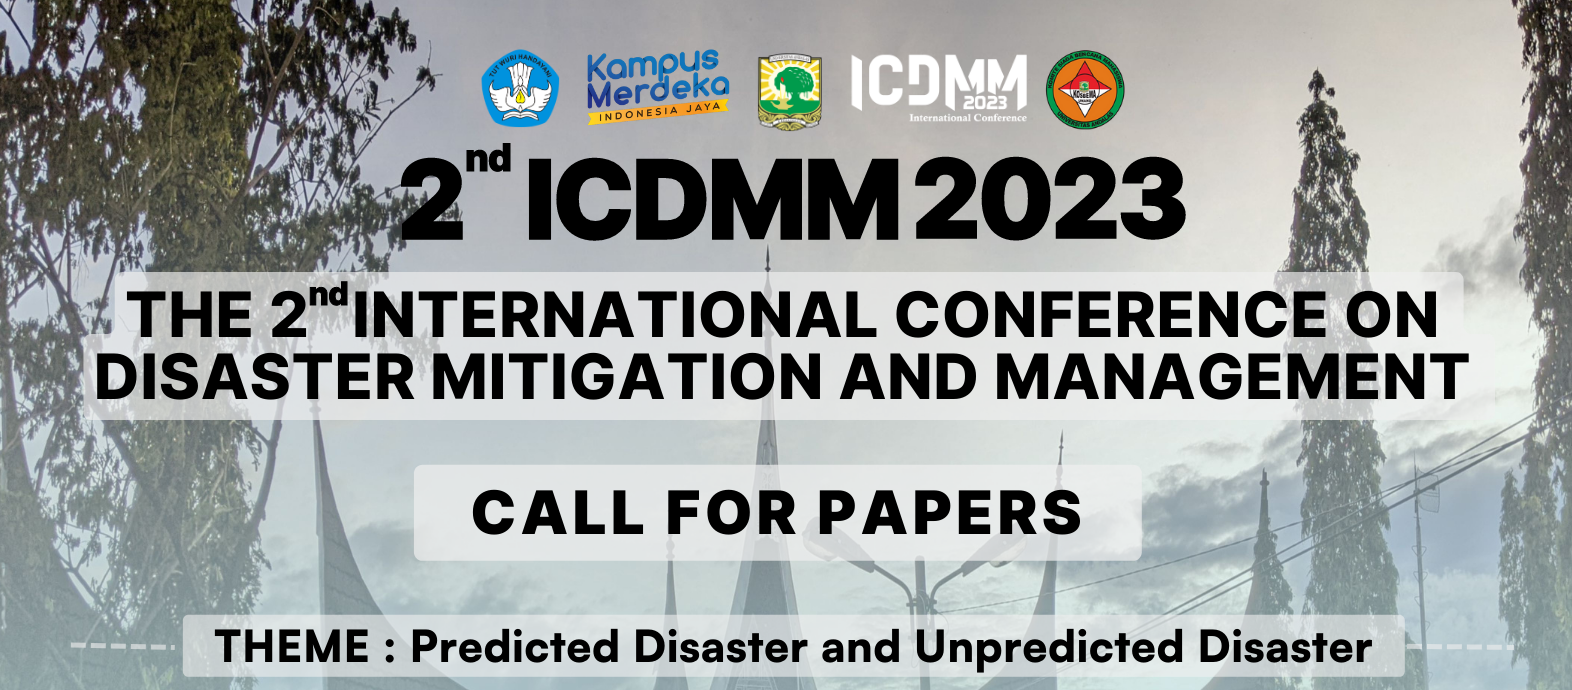 International Conference on Disaster Mitigation and Management (ICDMM) 2023